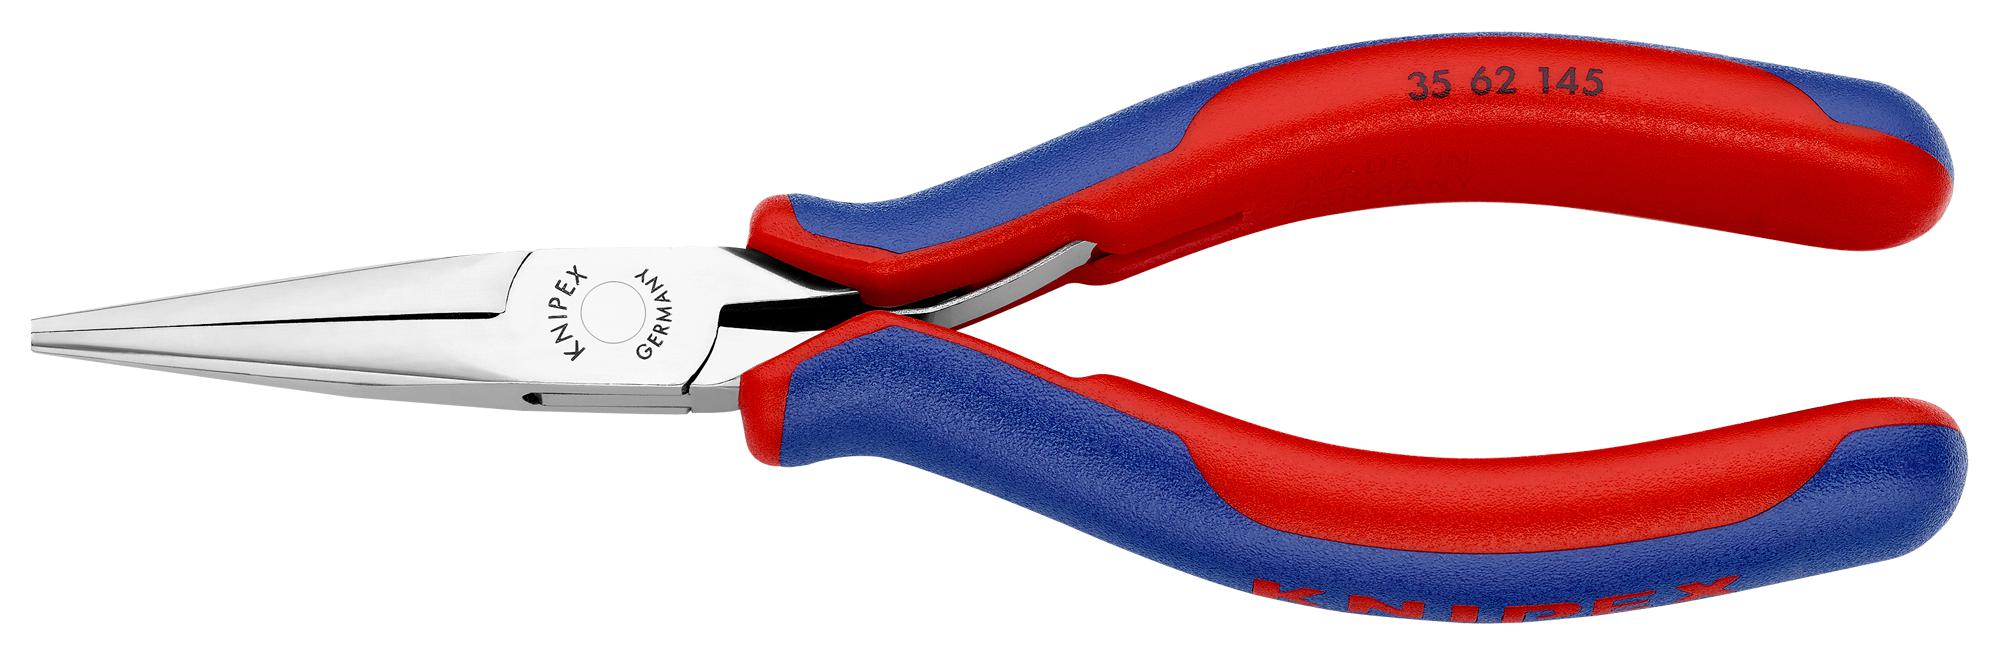 35 62 145 RELAY ADJUSTING PLIERS KNIPEX